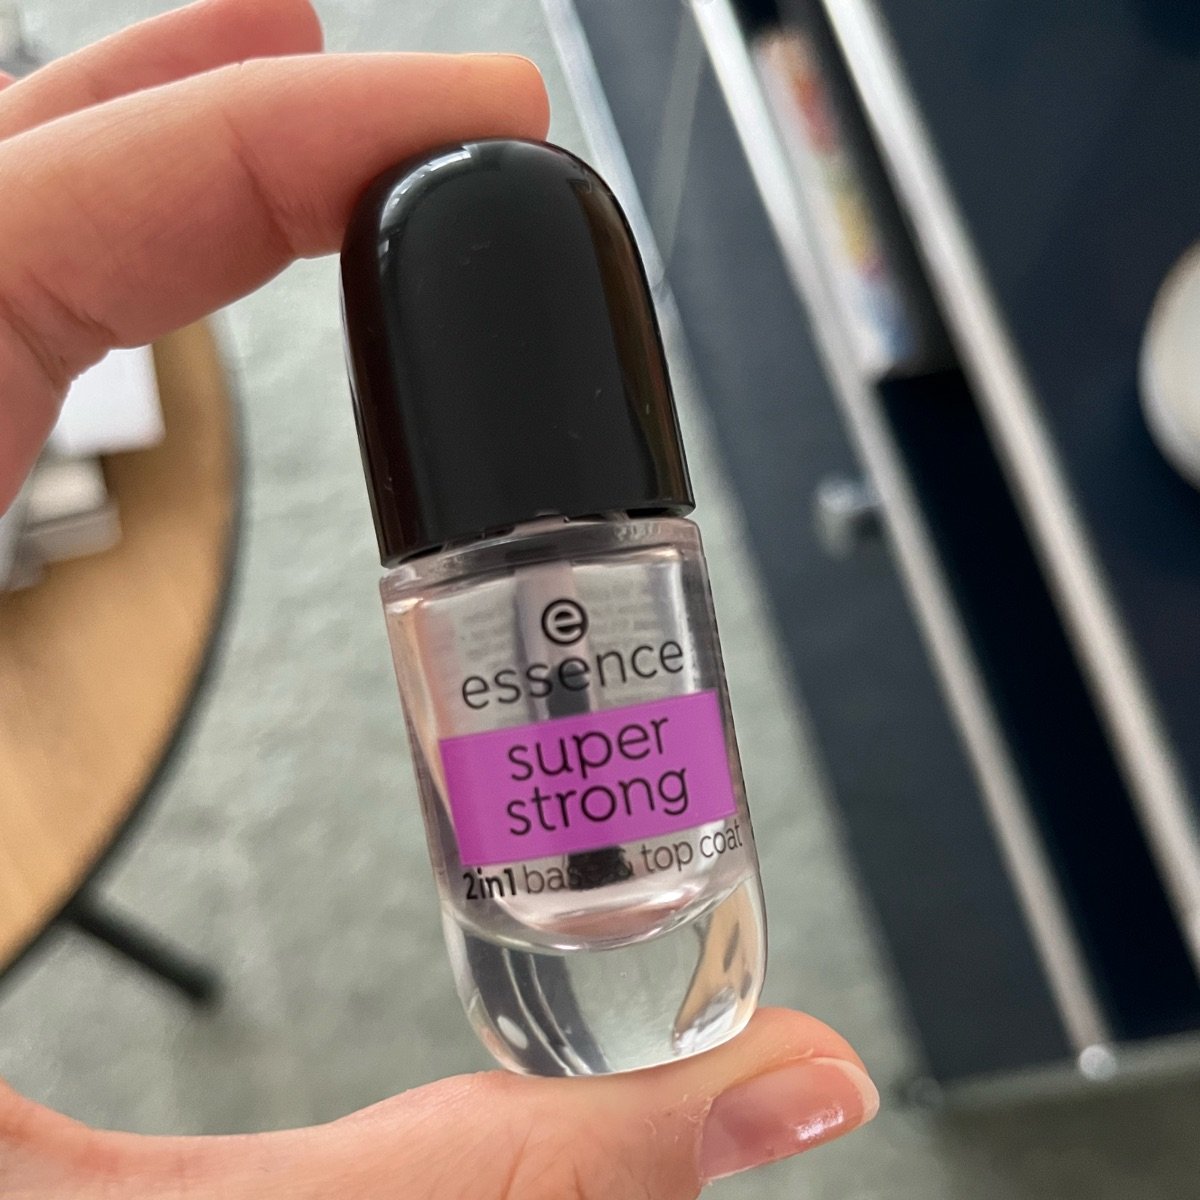 Essence super strong 2in1 base & top coat Reviews | abillion